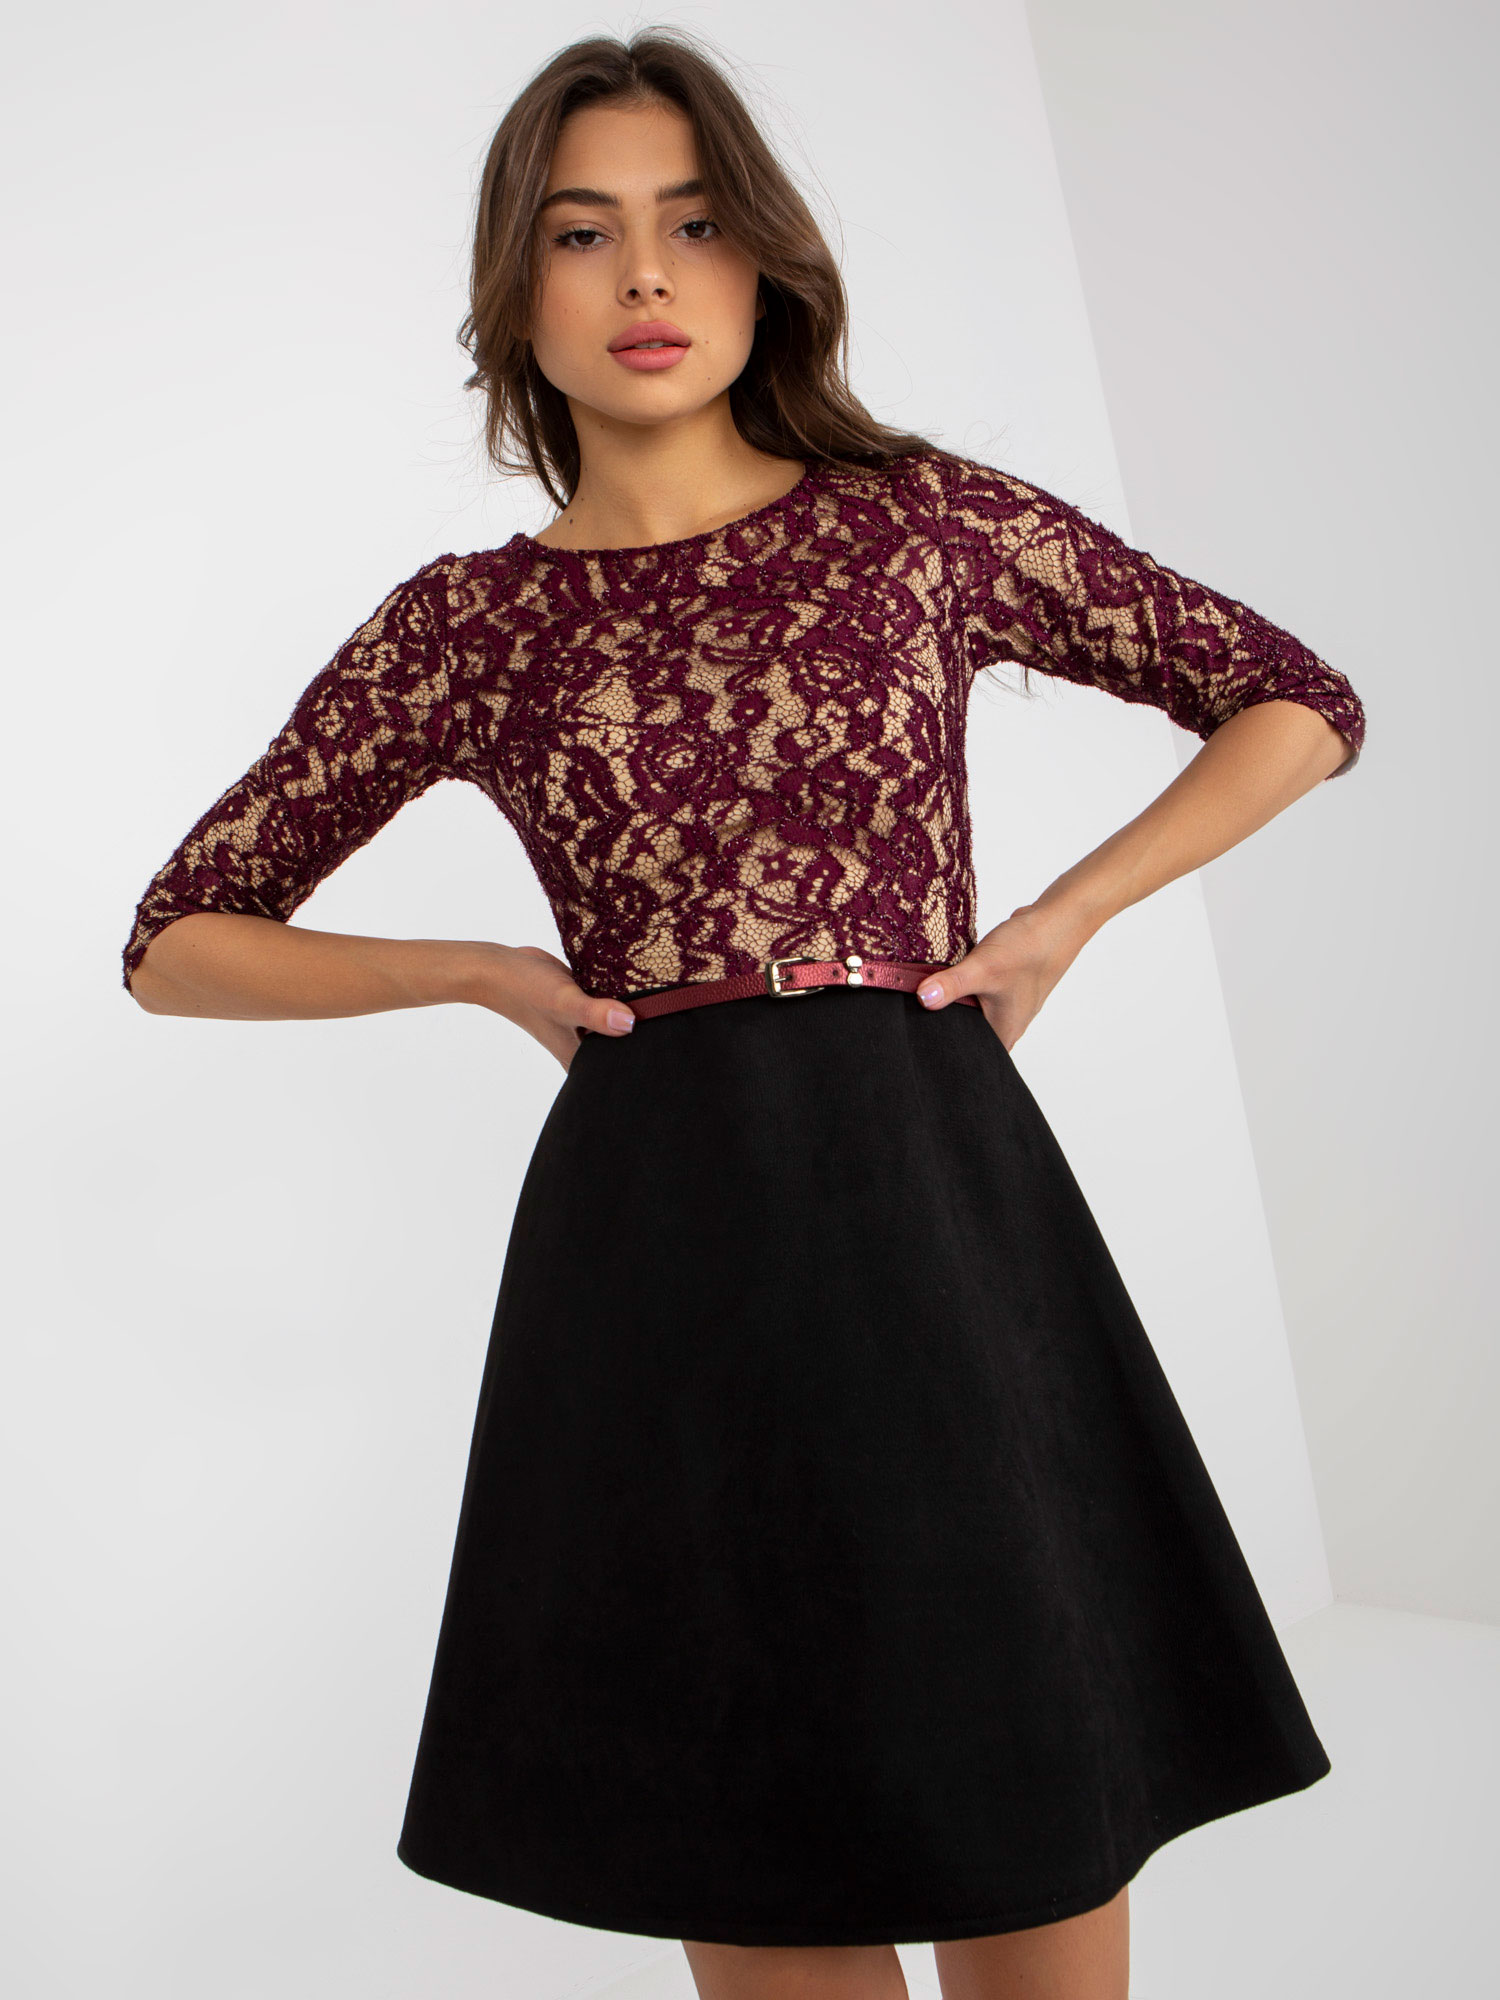 Purple and black flowing cocktail dress with lace